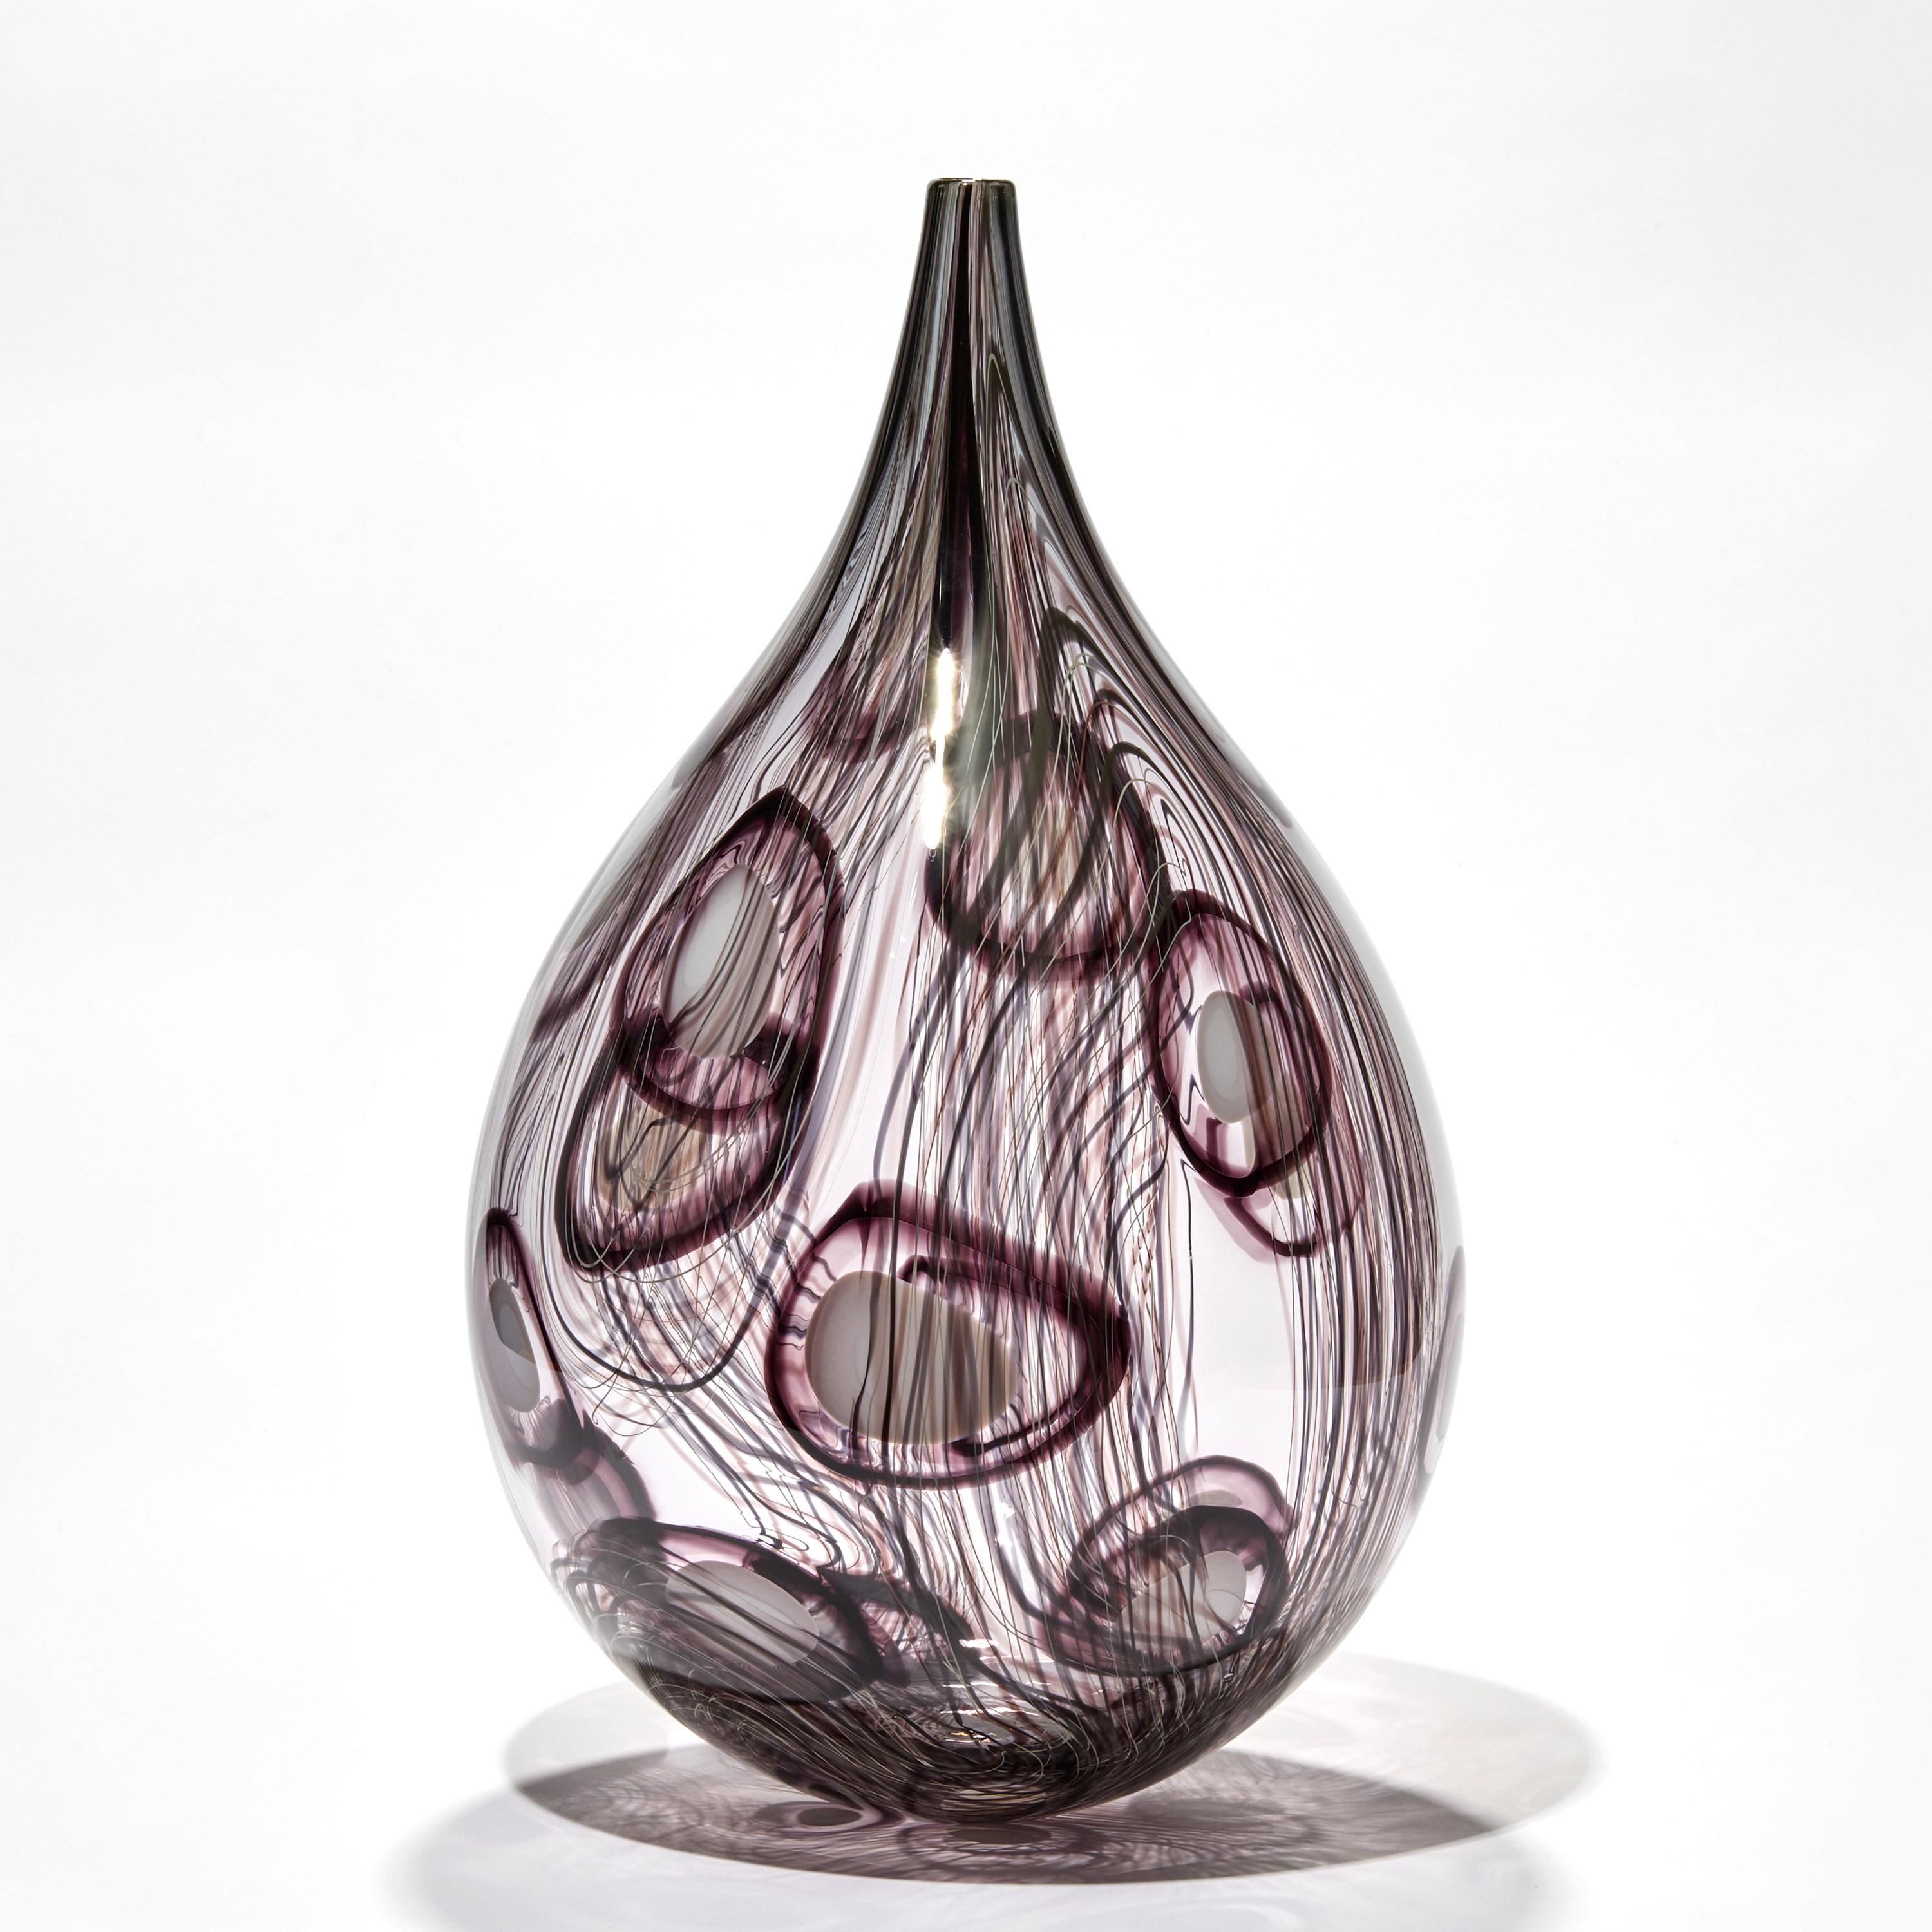 'Rings IV' is a unique glass artwork by the Swedish artist, Ann Wåhlström.

In her career, Wåhlström has designed wares for many international companies; glasses for the likes of Ikea and Kosta Boda, ceramics, metals and textiles for brands from